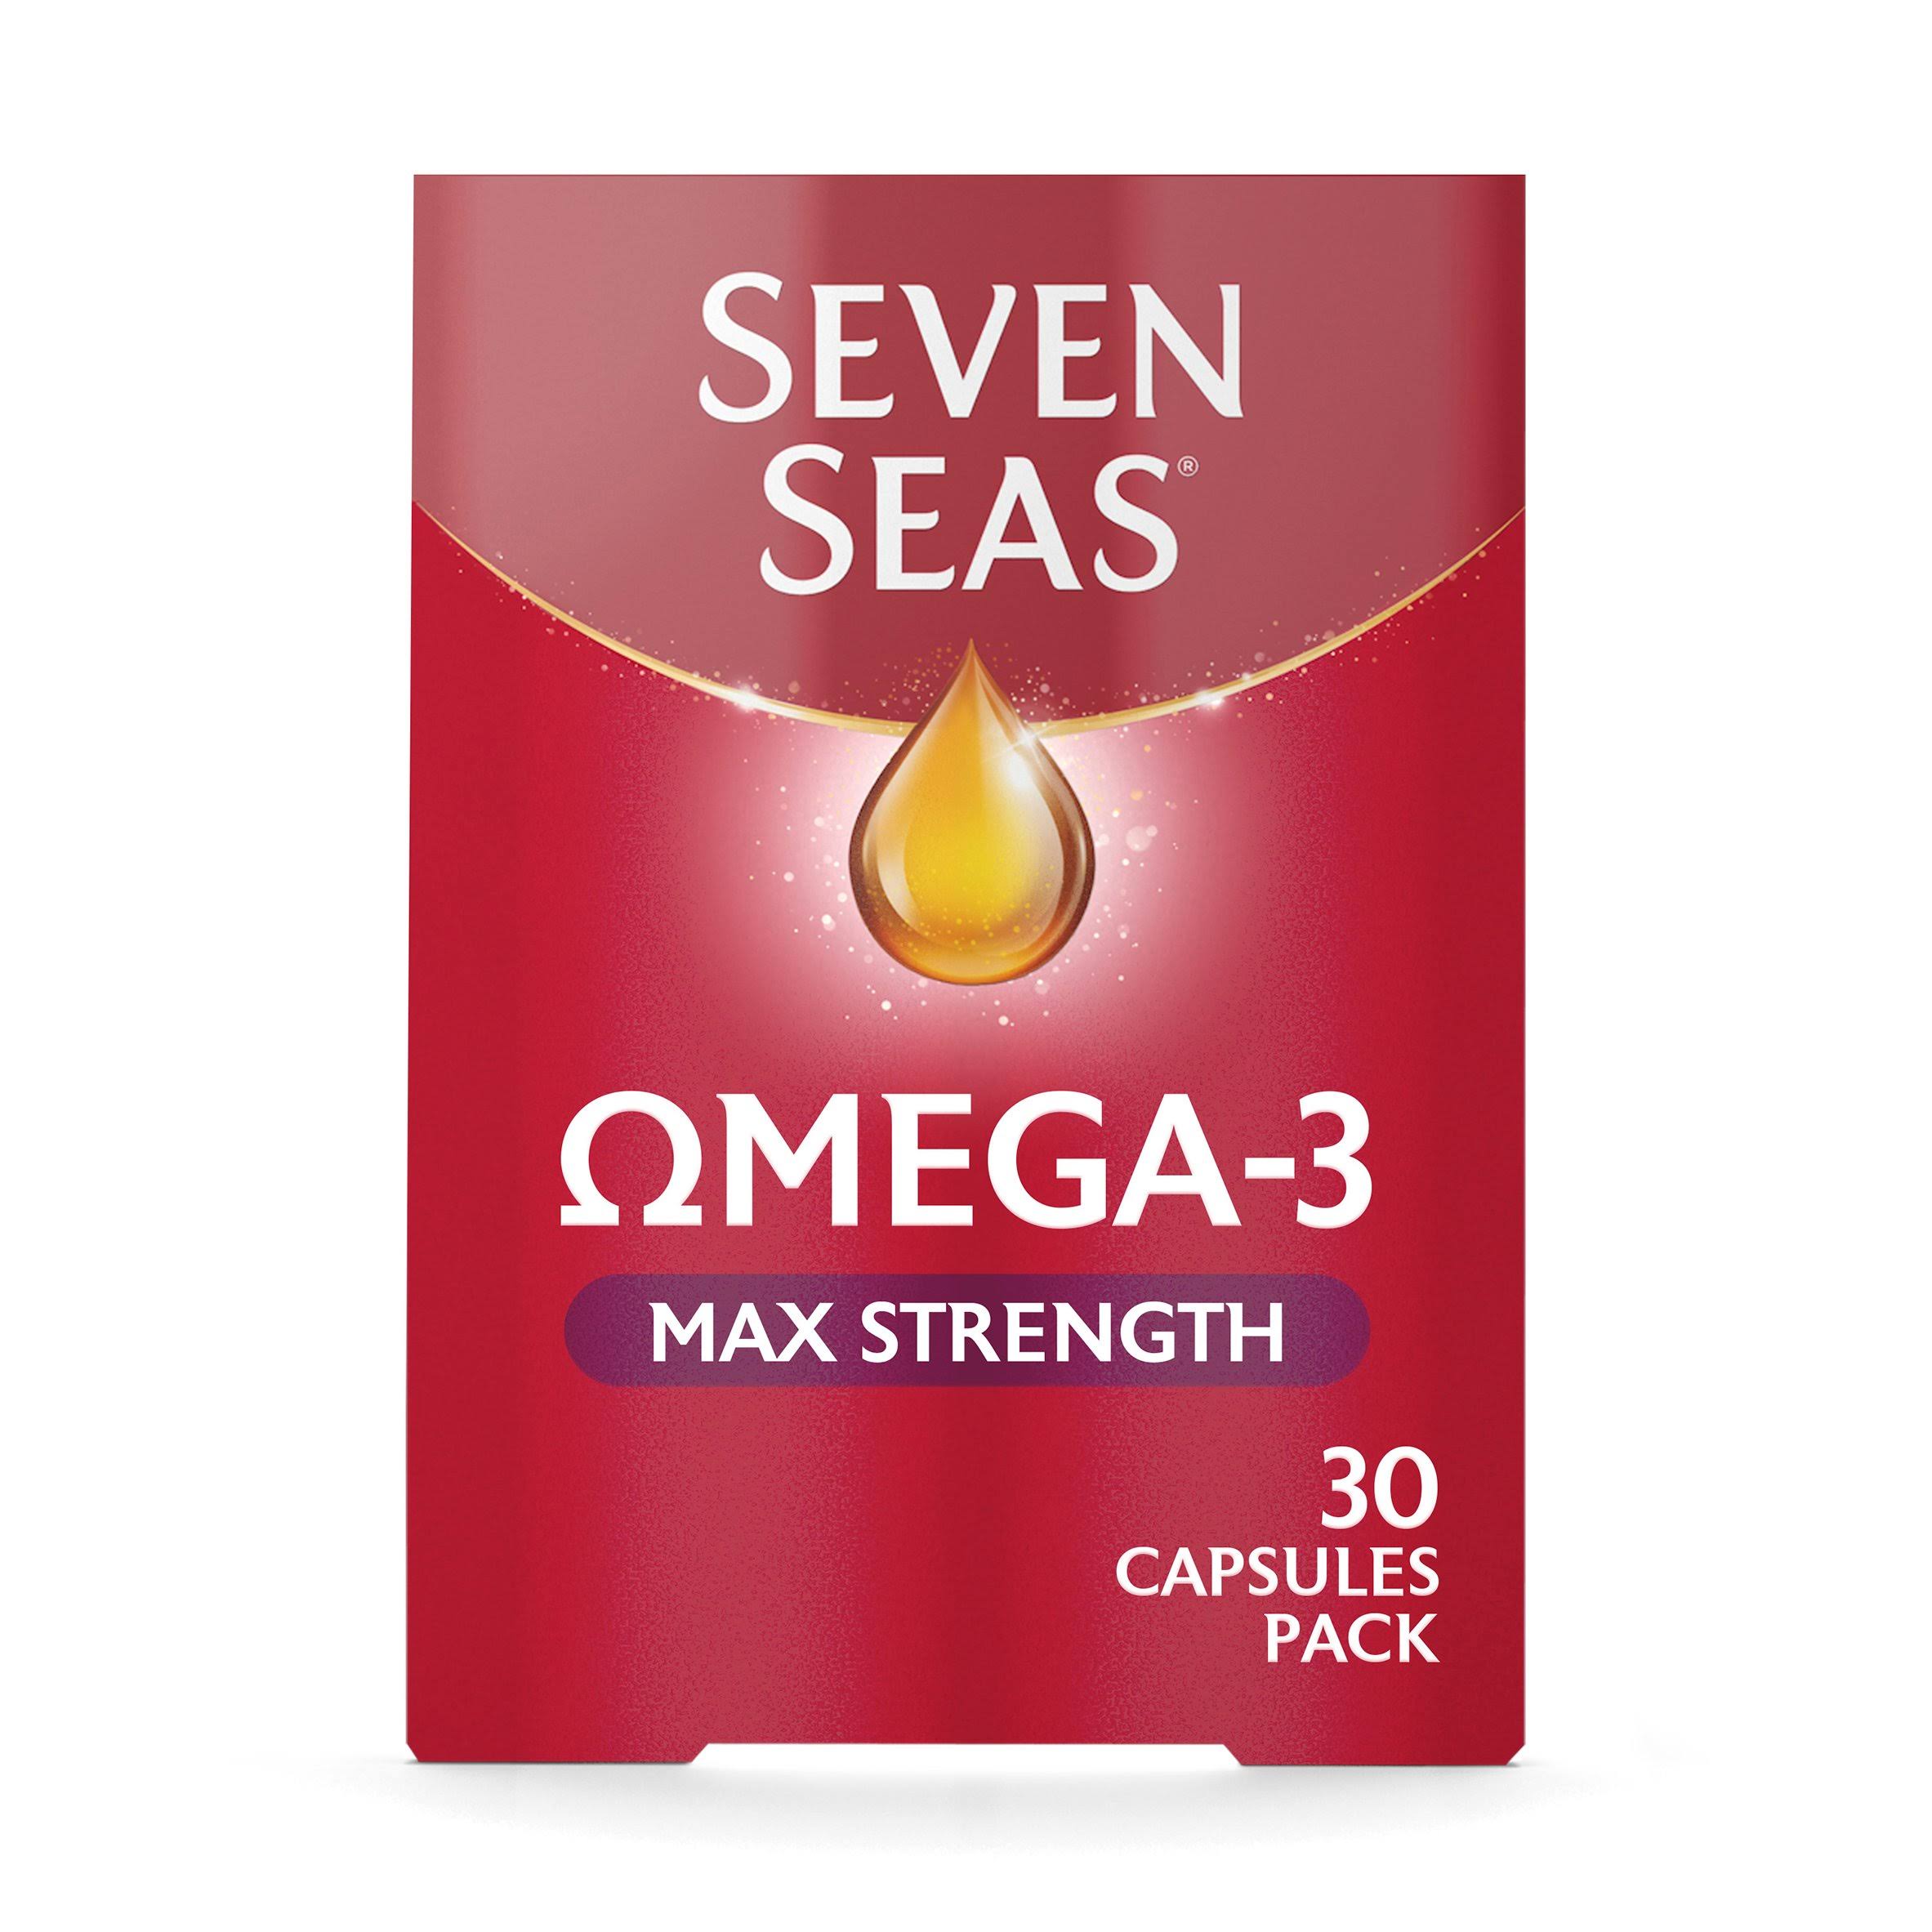 Seven Seas Omega 3 Fish Oil Max Strength With Vitamin D - 30 Capsules